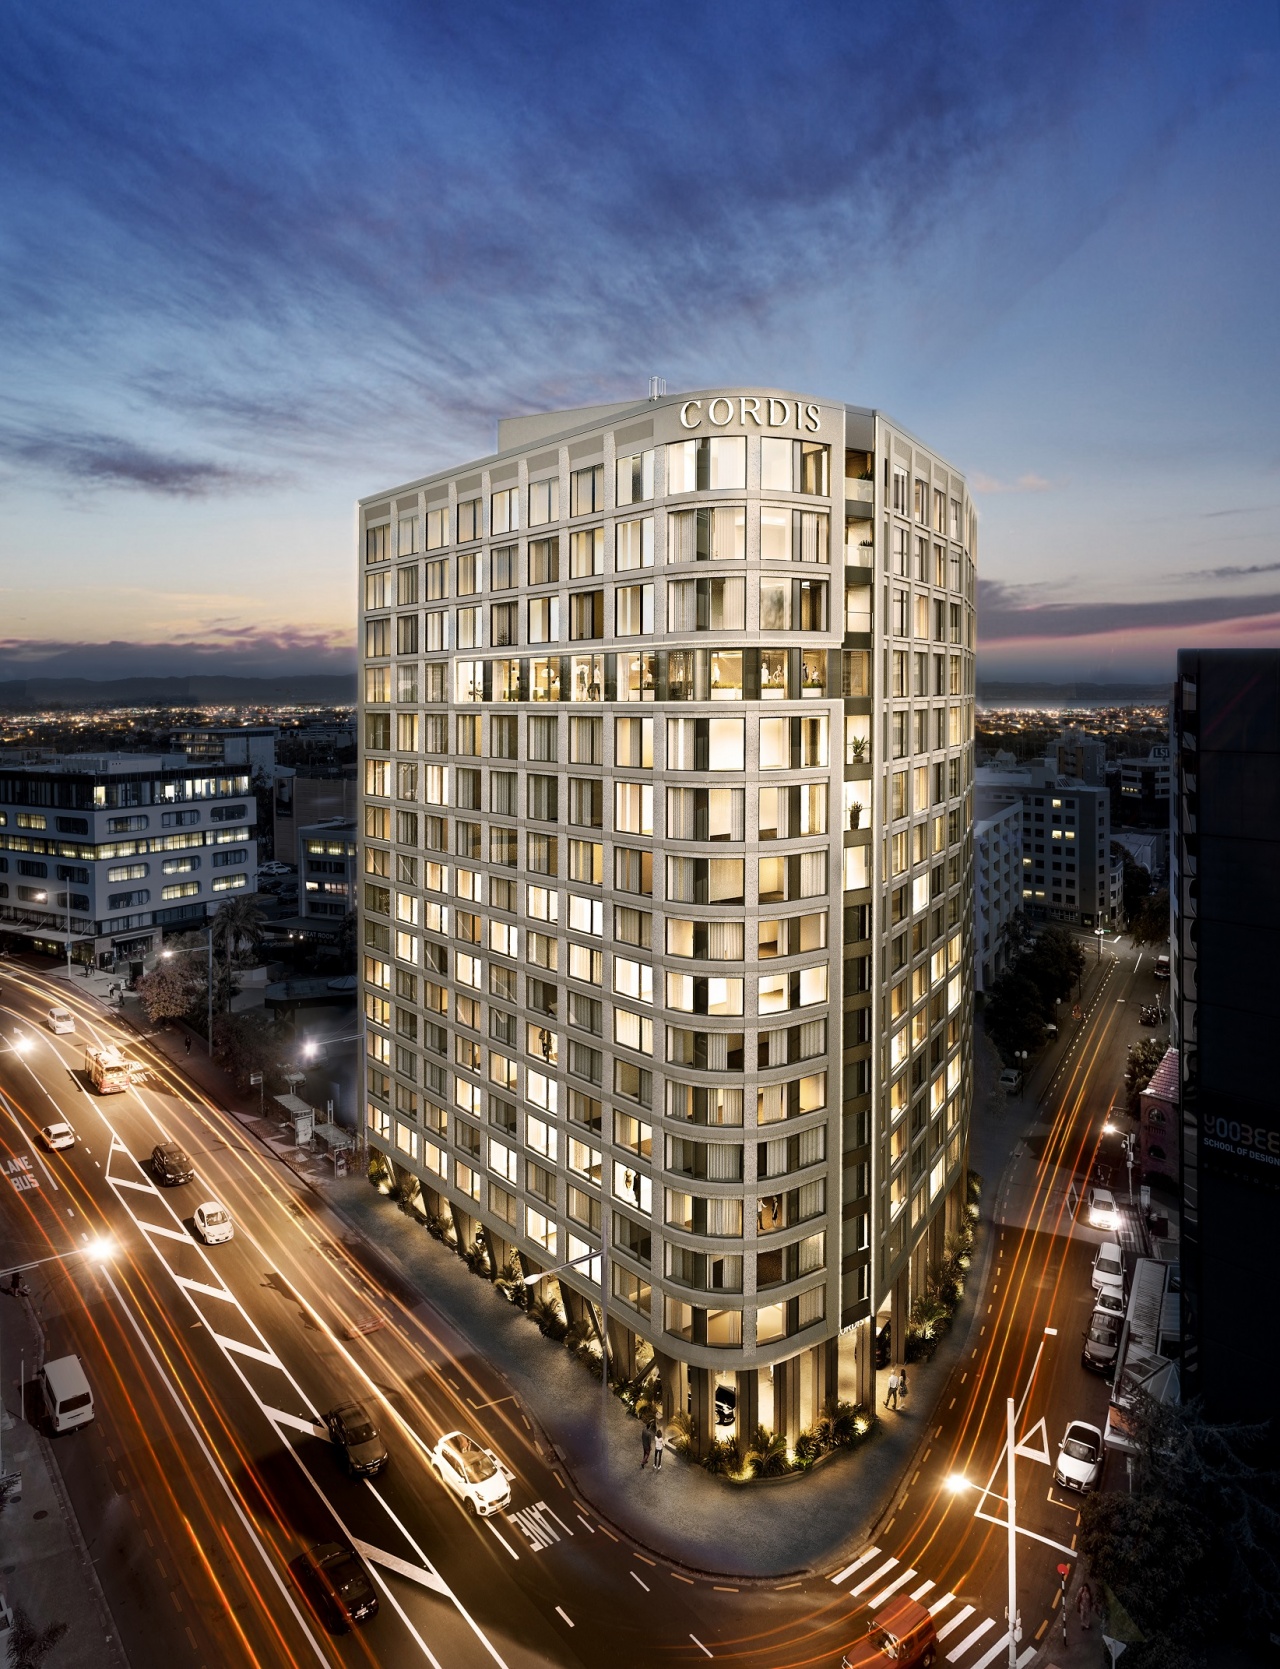 The new Pinnacle Tower at Cordis Auckland